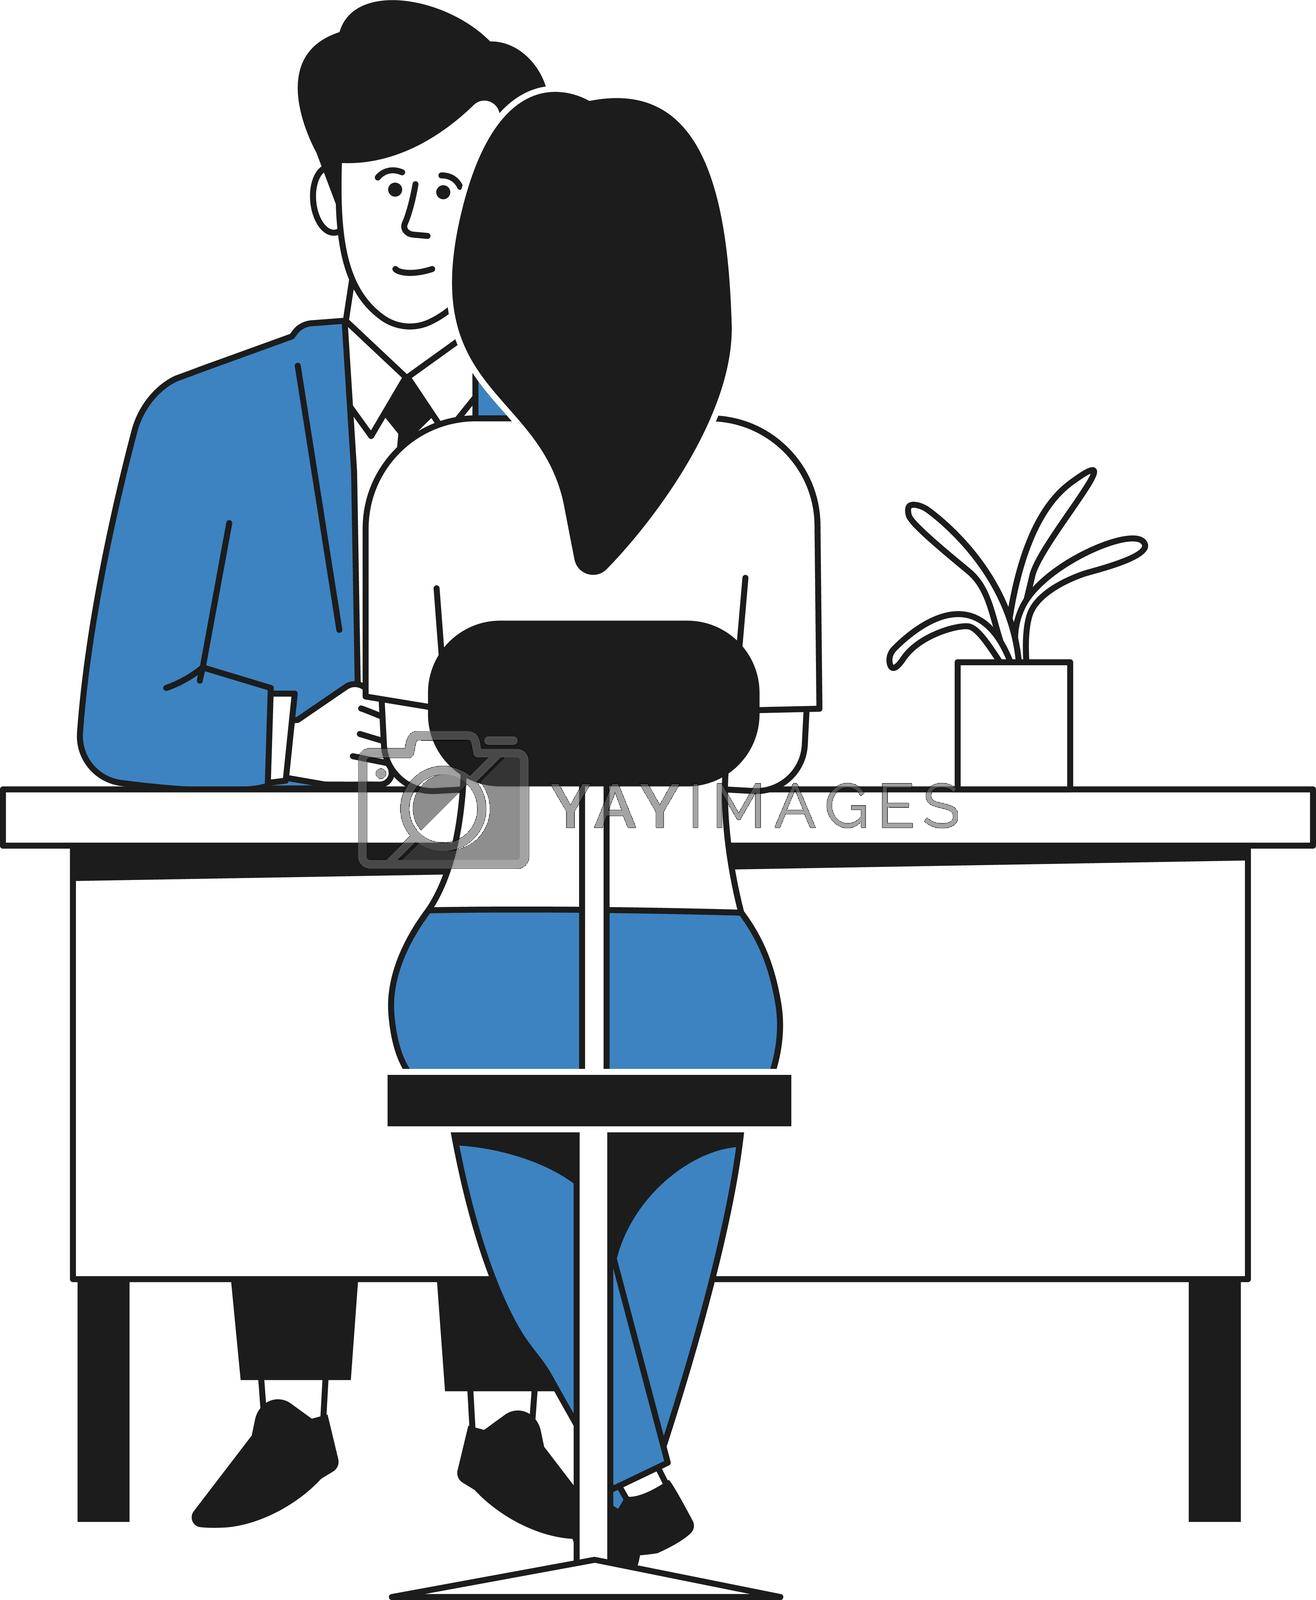 Royalty free image of Man and woman having business conversation. Job interview. Negotiation meeting by LadadikArt